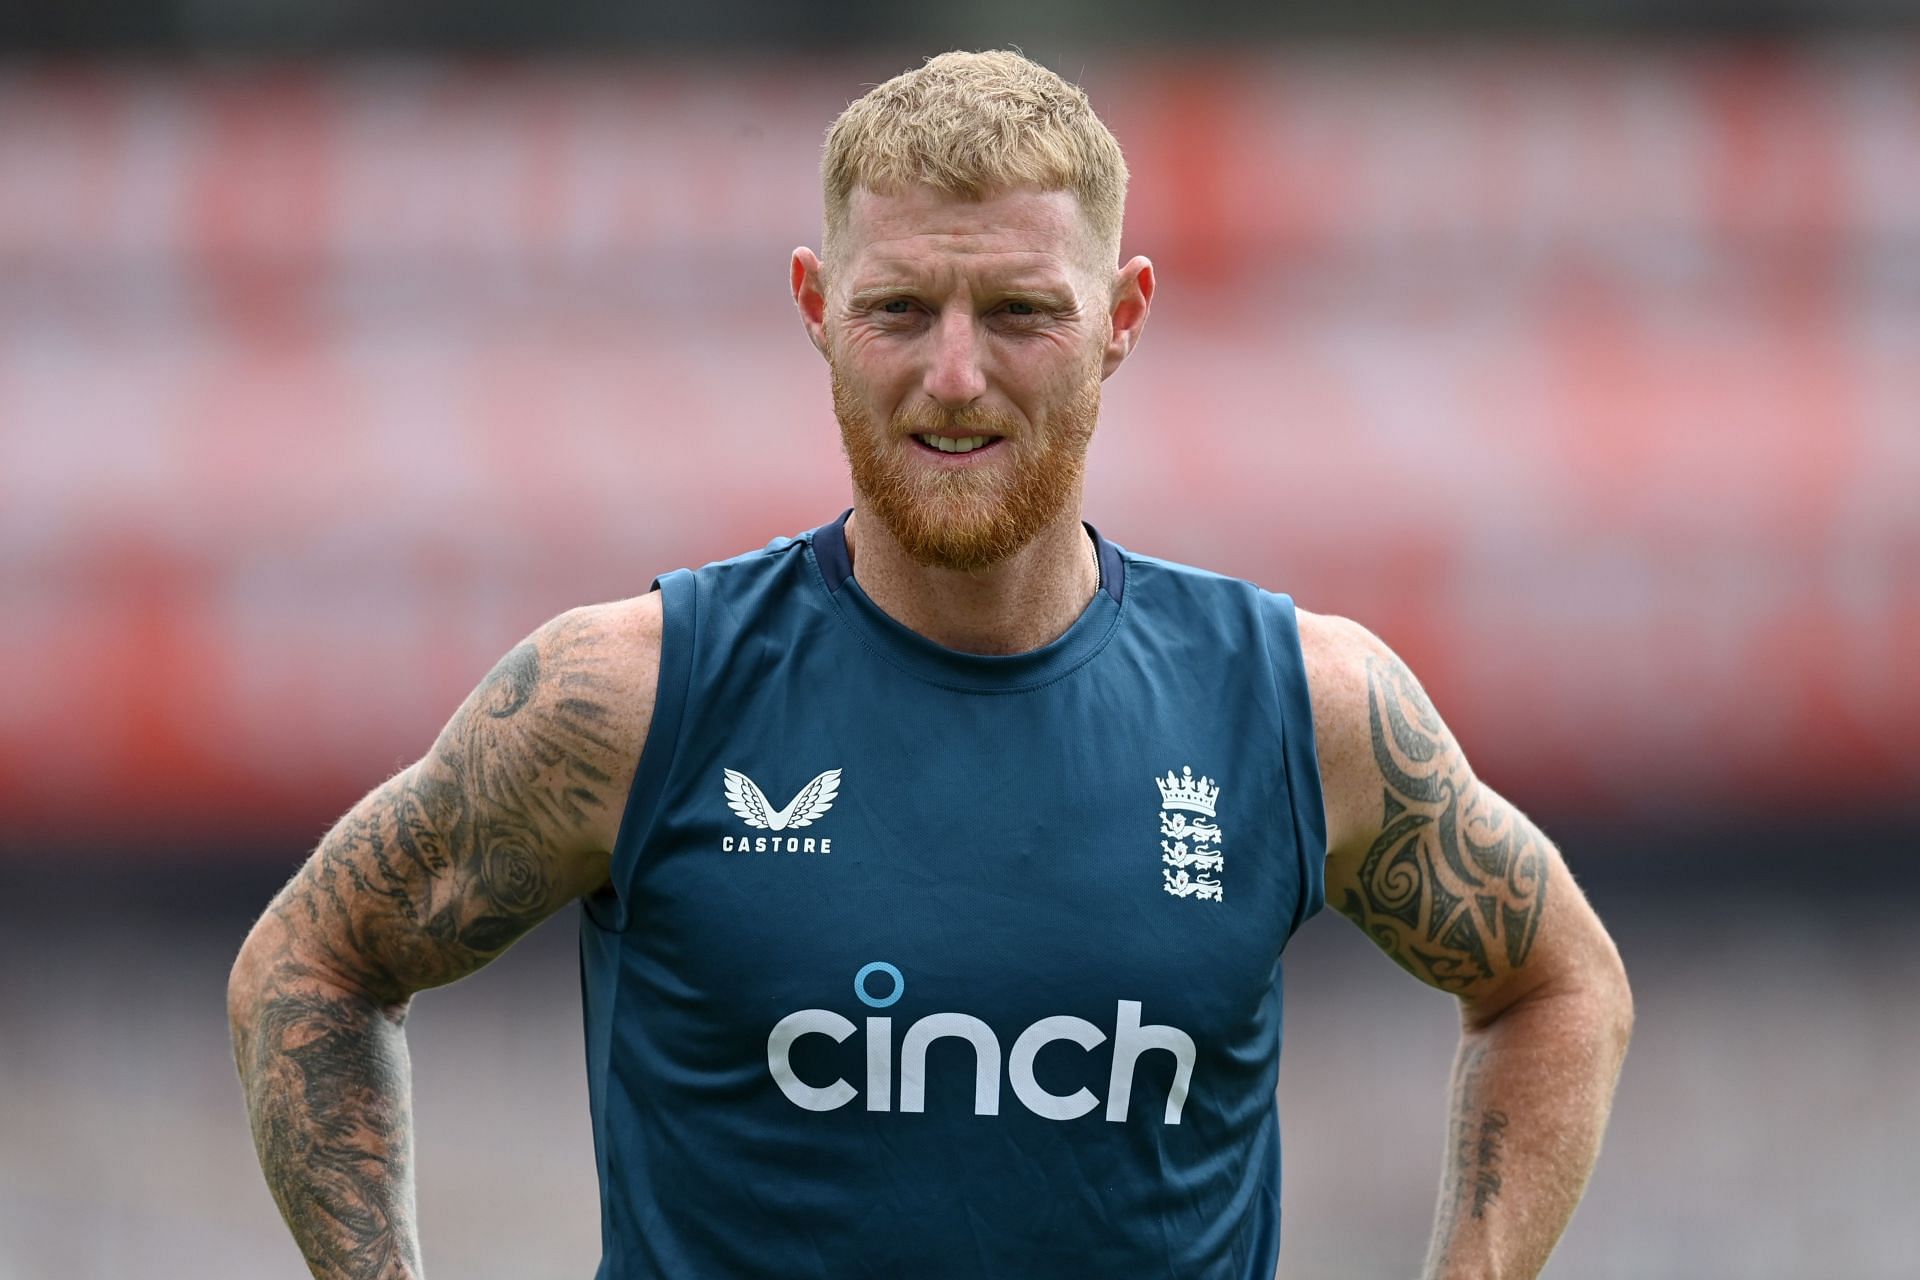 England skipper Ben Stokes could bowl in Ranchi